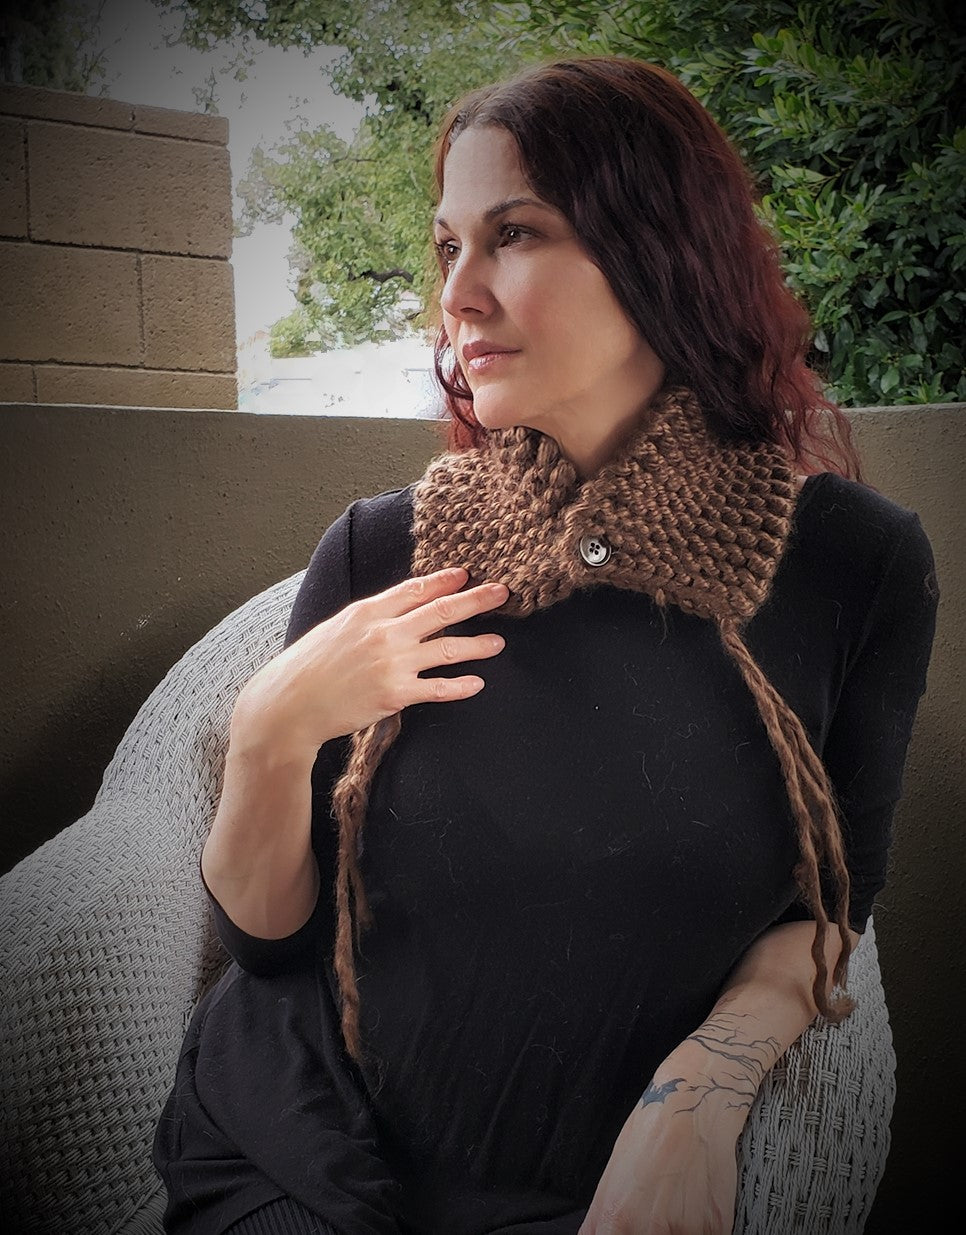 Handknit "Hot Cocoa" Brown  Cowl or Collar Scarf